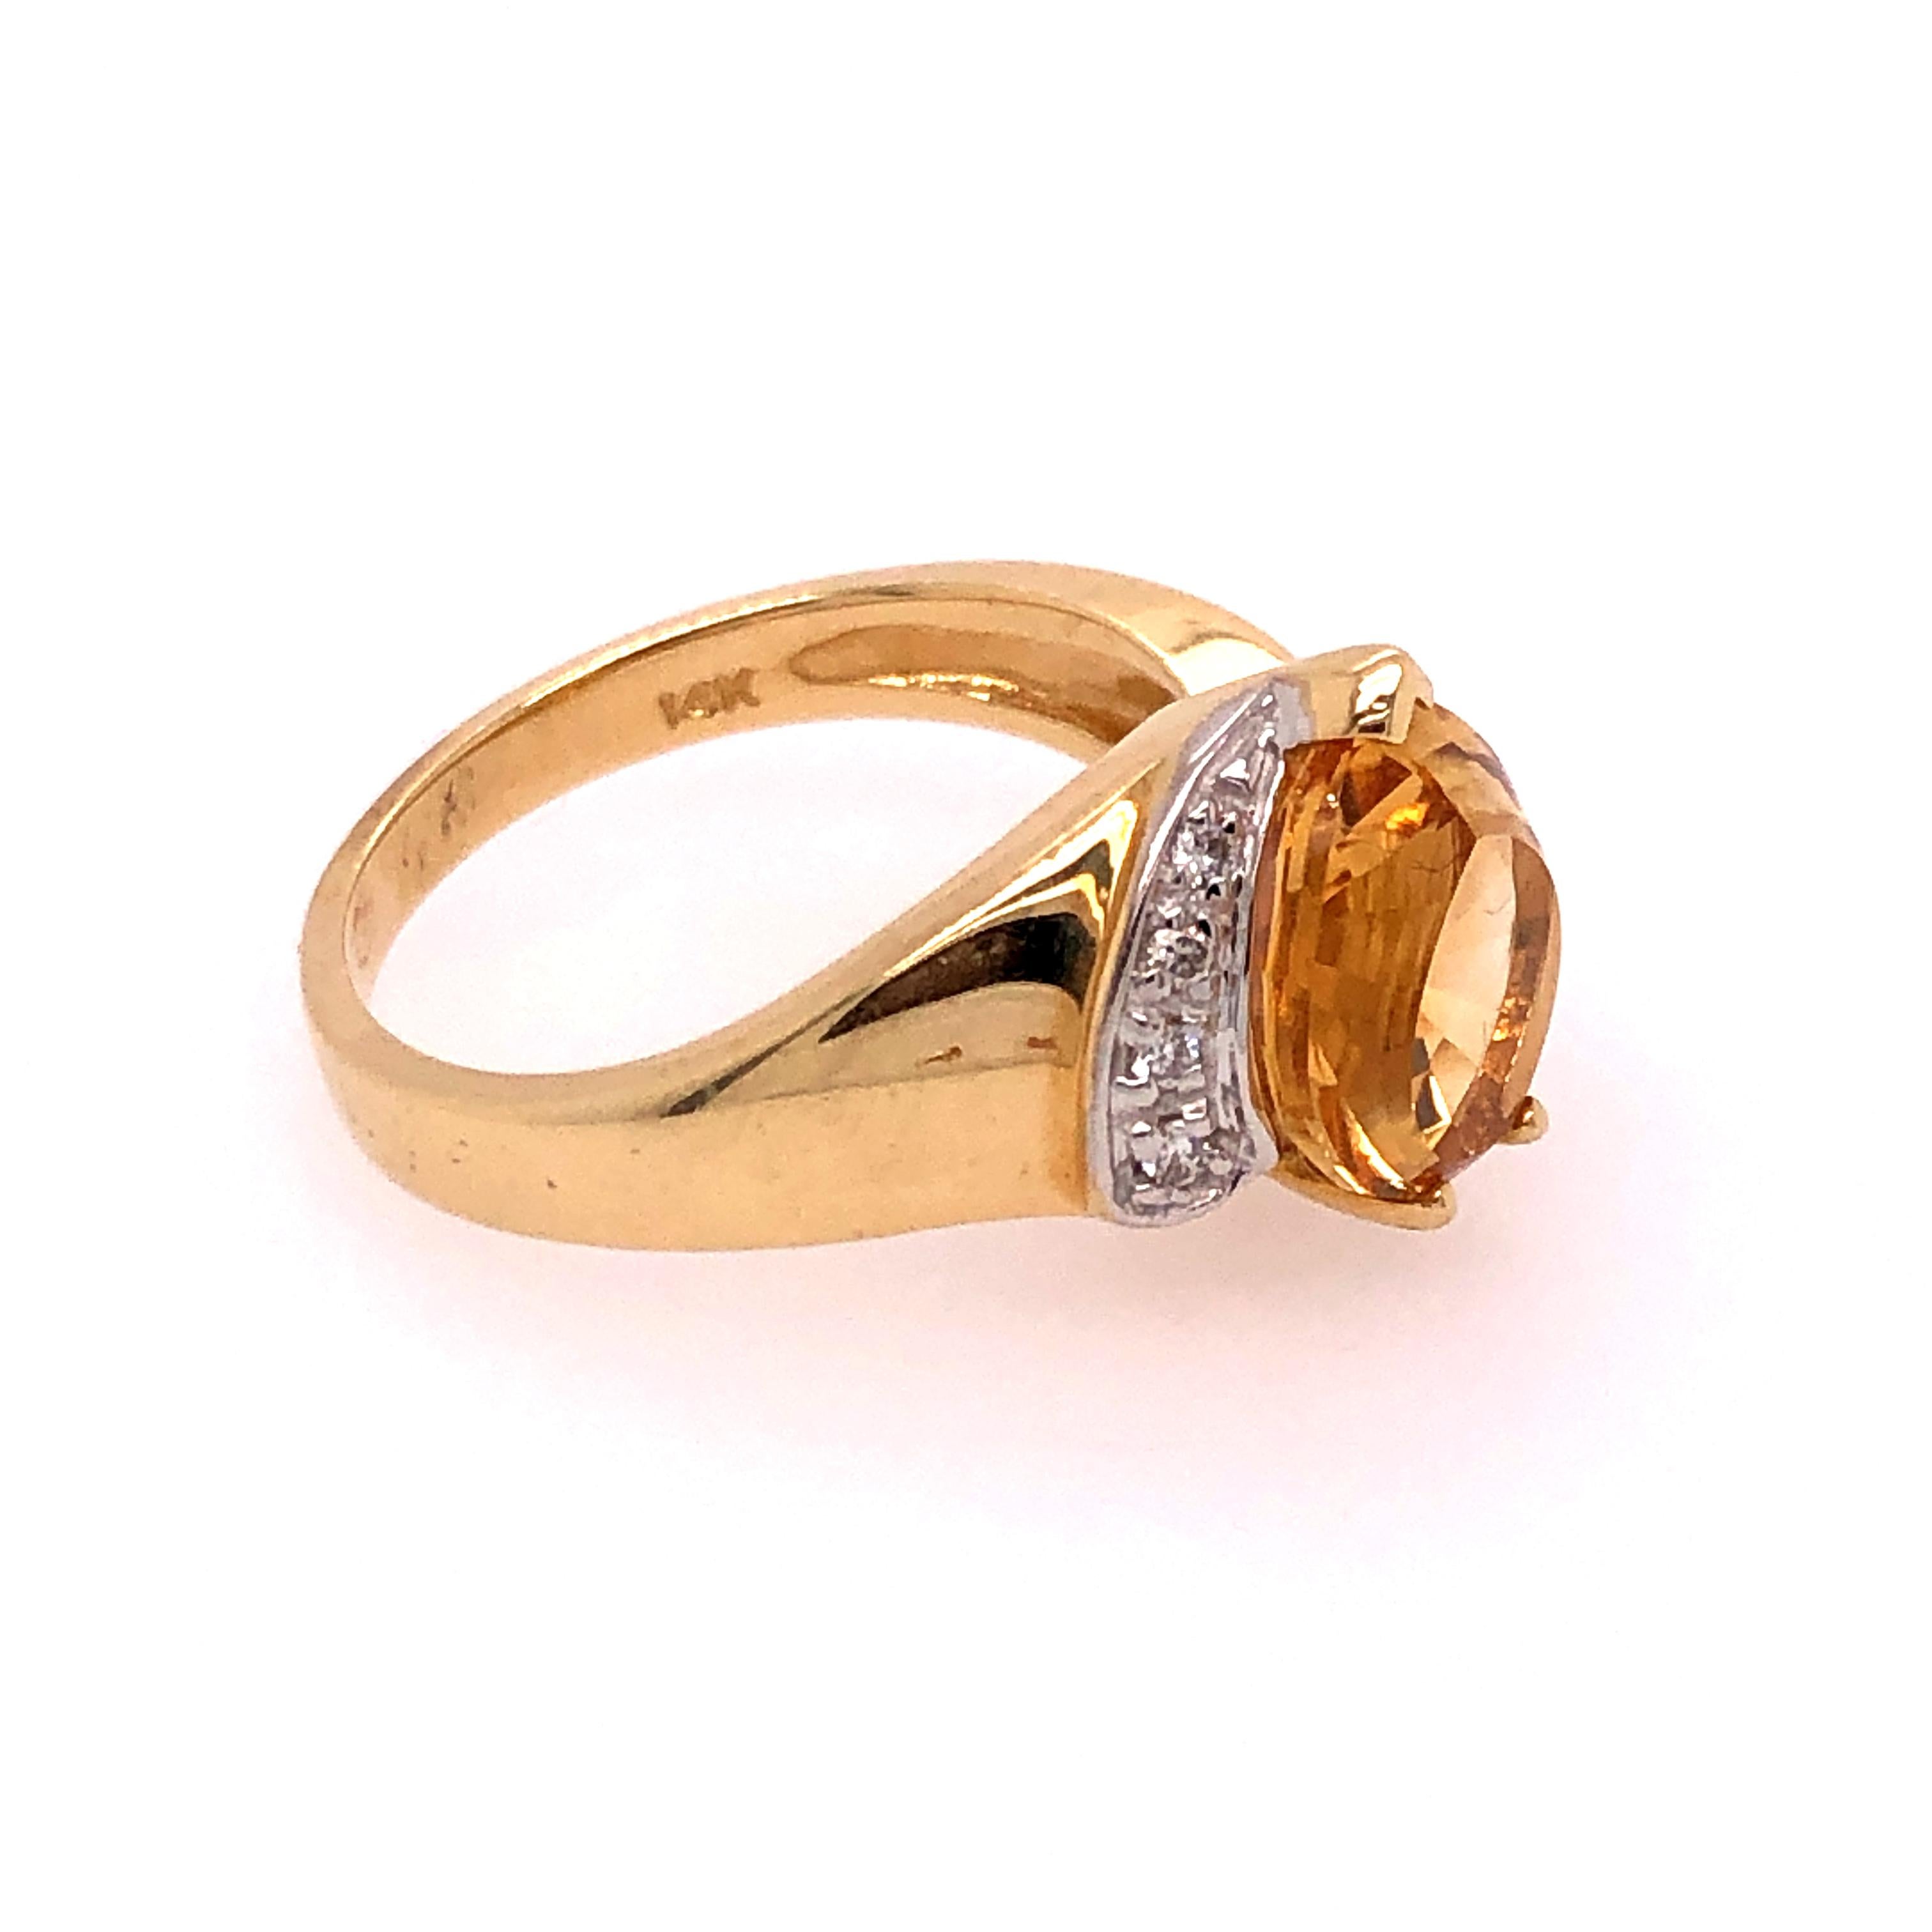 Wear a little bit of sunshine in this fun 14K yellow gold pear shaped citrine and diamond ring! The citrine measures 9 mm x 11 mm and 4 small graduated melee diamonds grace one side of the citrine. 

Size: approximately 6.5 

Stamped: 14K